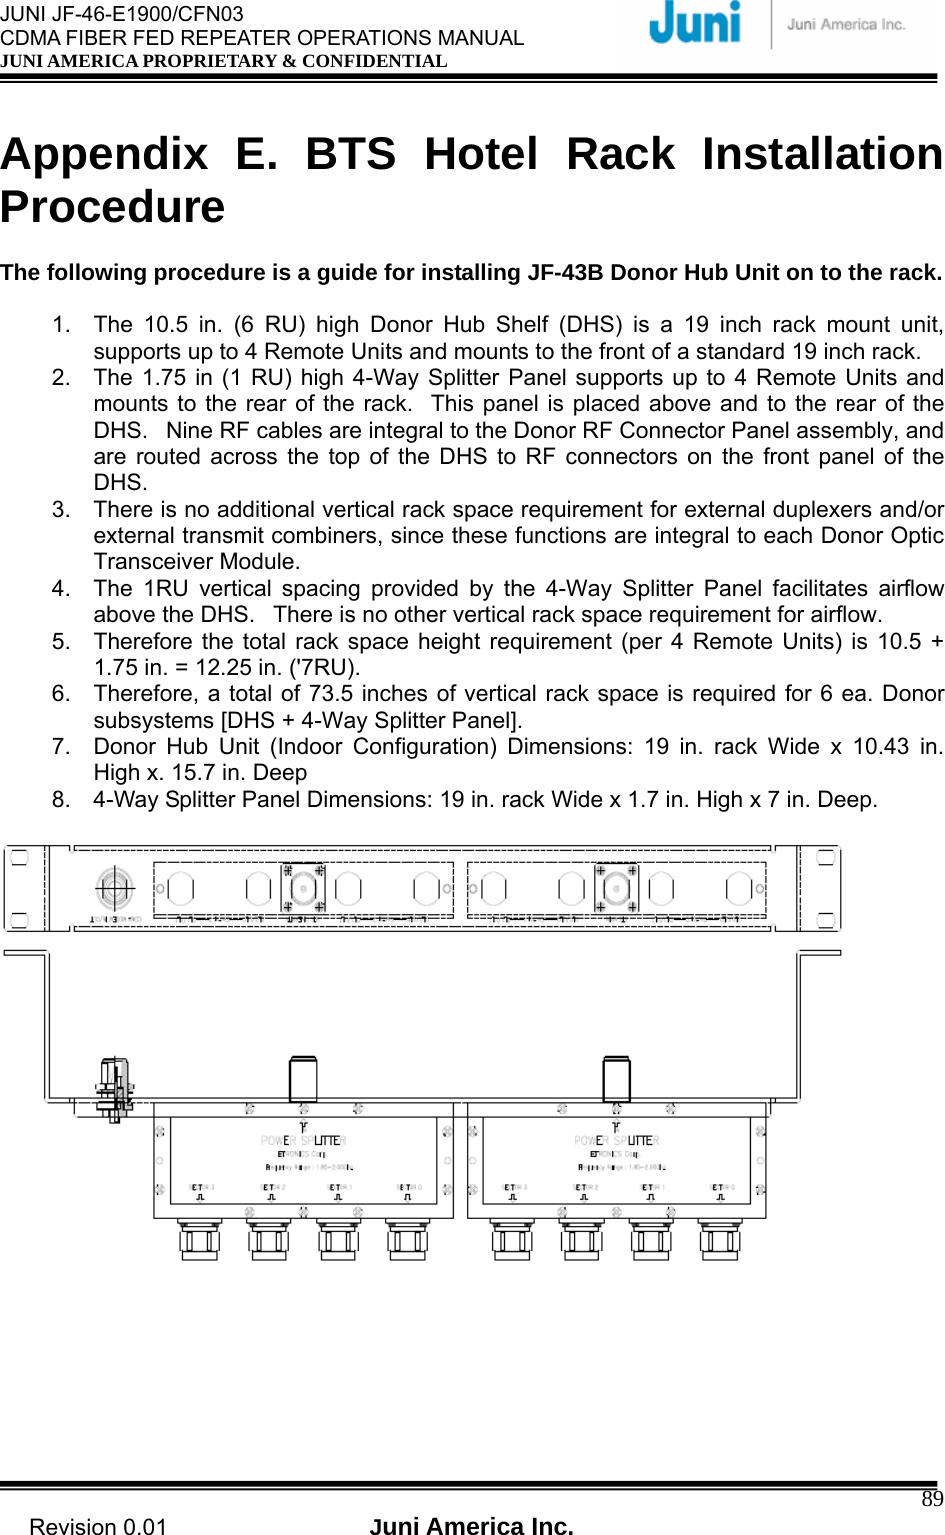  JUNI JF-46-E1900/CFN03 CDMA FIBER FED REPEATER OPERATIONS MANUAL JUNI AMERICA PROPRIETARY &amp; CONFIDENTIAL                                   Revision 0.01  Juni America Inc.  89 Appendix E. BTS Hotel Rack Installation Procedure  The following procedure is a guide for installing JF-43B Donor Hub Unit on to the rack.  1.  The 10.5 in. (6 RU) high Donor Hub Shelf (DHS) is a 19 inch rack mount unit, supports up to 4 Remote Units and mounts to the front of a standard 19 inch rack. 2.  The 1.75 in (1 RU) high 4-Way Splitter Panel supports up to 4 Remote Units and mounts to the rear of the rack.   This panel is placed above and to the rear of the DHS.   Nine RF cables are integral to the Donor RF Connector Panel assembly, and are routed across the top of the DHS to RF connectors on the front panel of the DHS. 3.  There is no additional vertical rack space requirement for external duplexers and/or external transmit combiners, since these functions are integral to each Donor Optic Transceiver Module. 4.  The 1RU vertical spacing provided by the 4-Way Splitter Panel facilitates airflow above the DHS.   There is no other vertical rack space requirement for airflow. 5.  Therefore the total rack space height requirement (per 4 Remote Units) is 10.5 + 1.75 in. = 12.25 in. (&apos;7RU). 6.  Therefore, a total of 73.5 inches of vertical rack space is required for 6 ea. Donor subsystems [DHS + 4-Way Splitter Panel]. 7.  Donor Hub Unit (Indoor Configuration) Dimensions: 19 in. rack Wide x 10.43 in. High x. 15.7 in. Deep 8.  4-Way Splitter Panel Dimensions: 19 in. rack Wide x 1.7 in. High x 7 in. Deep.    